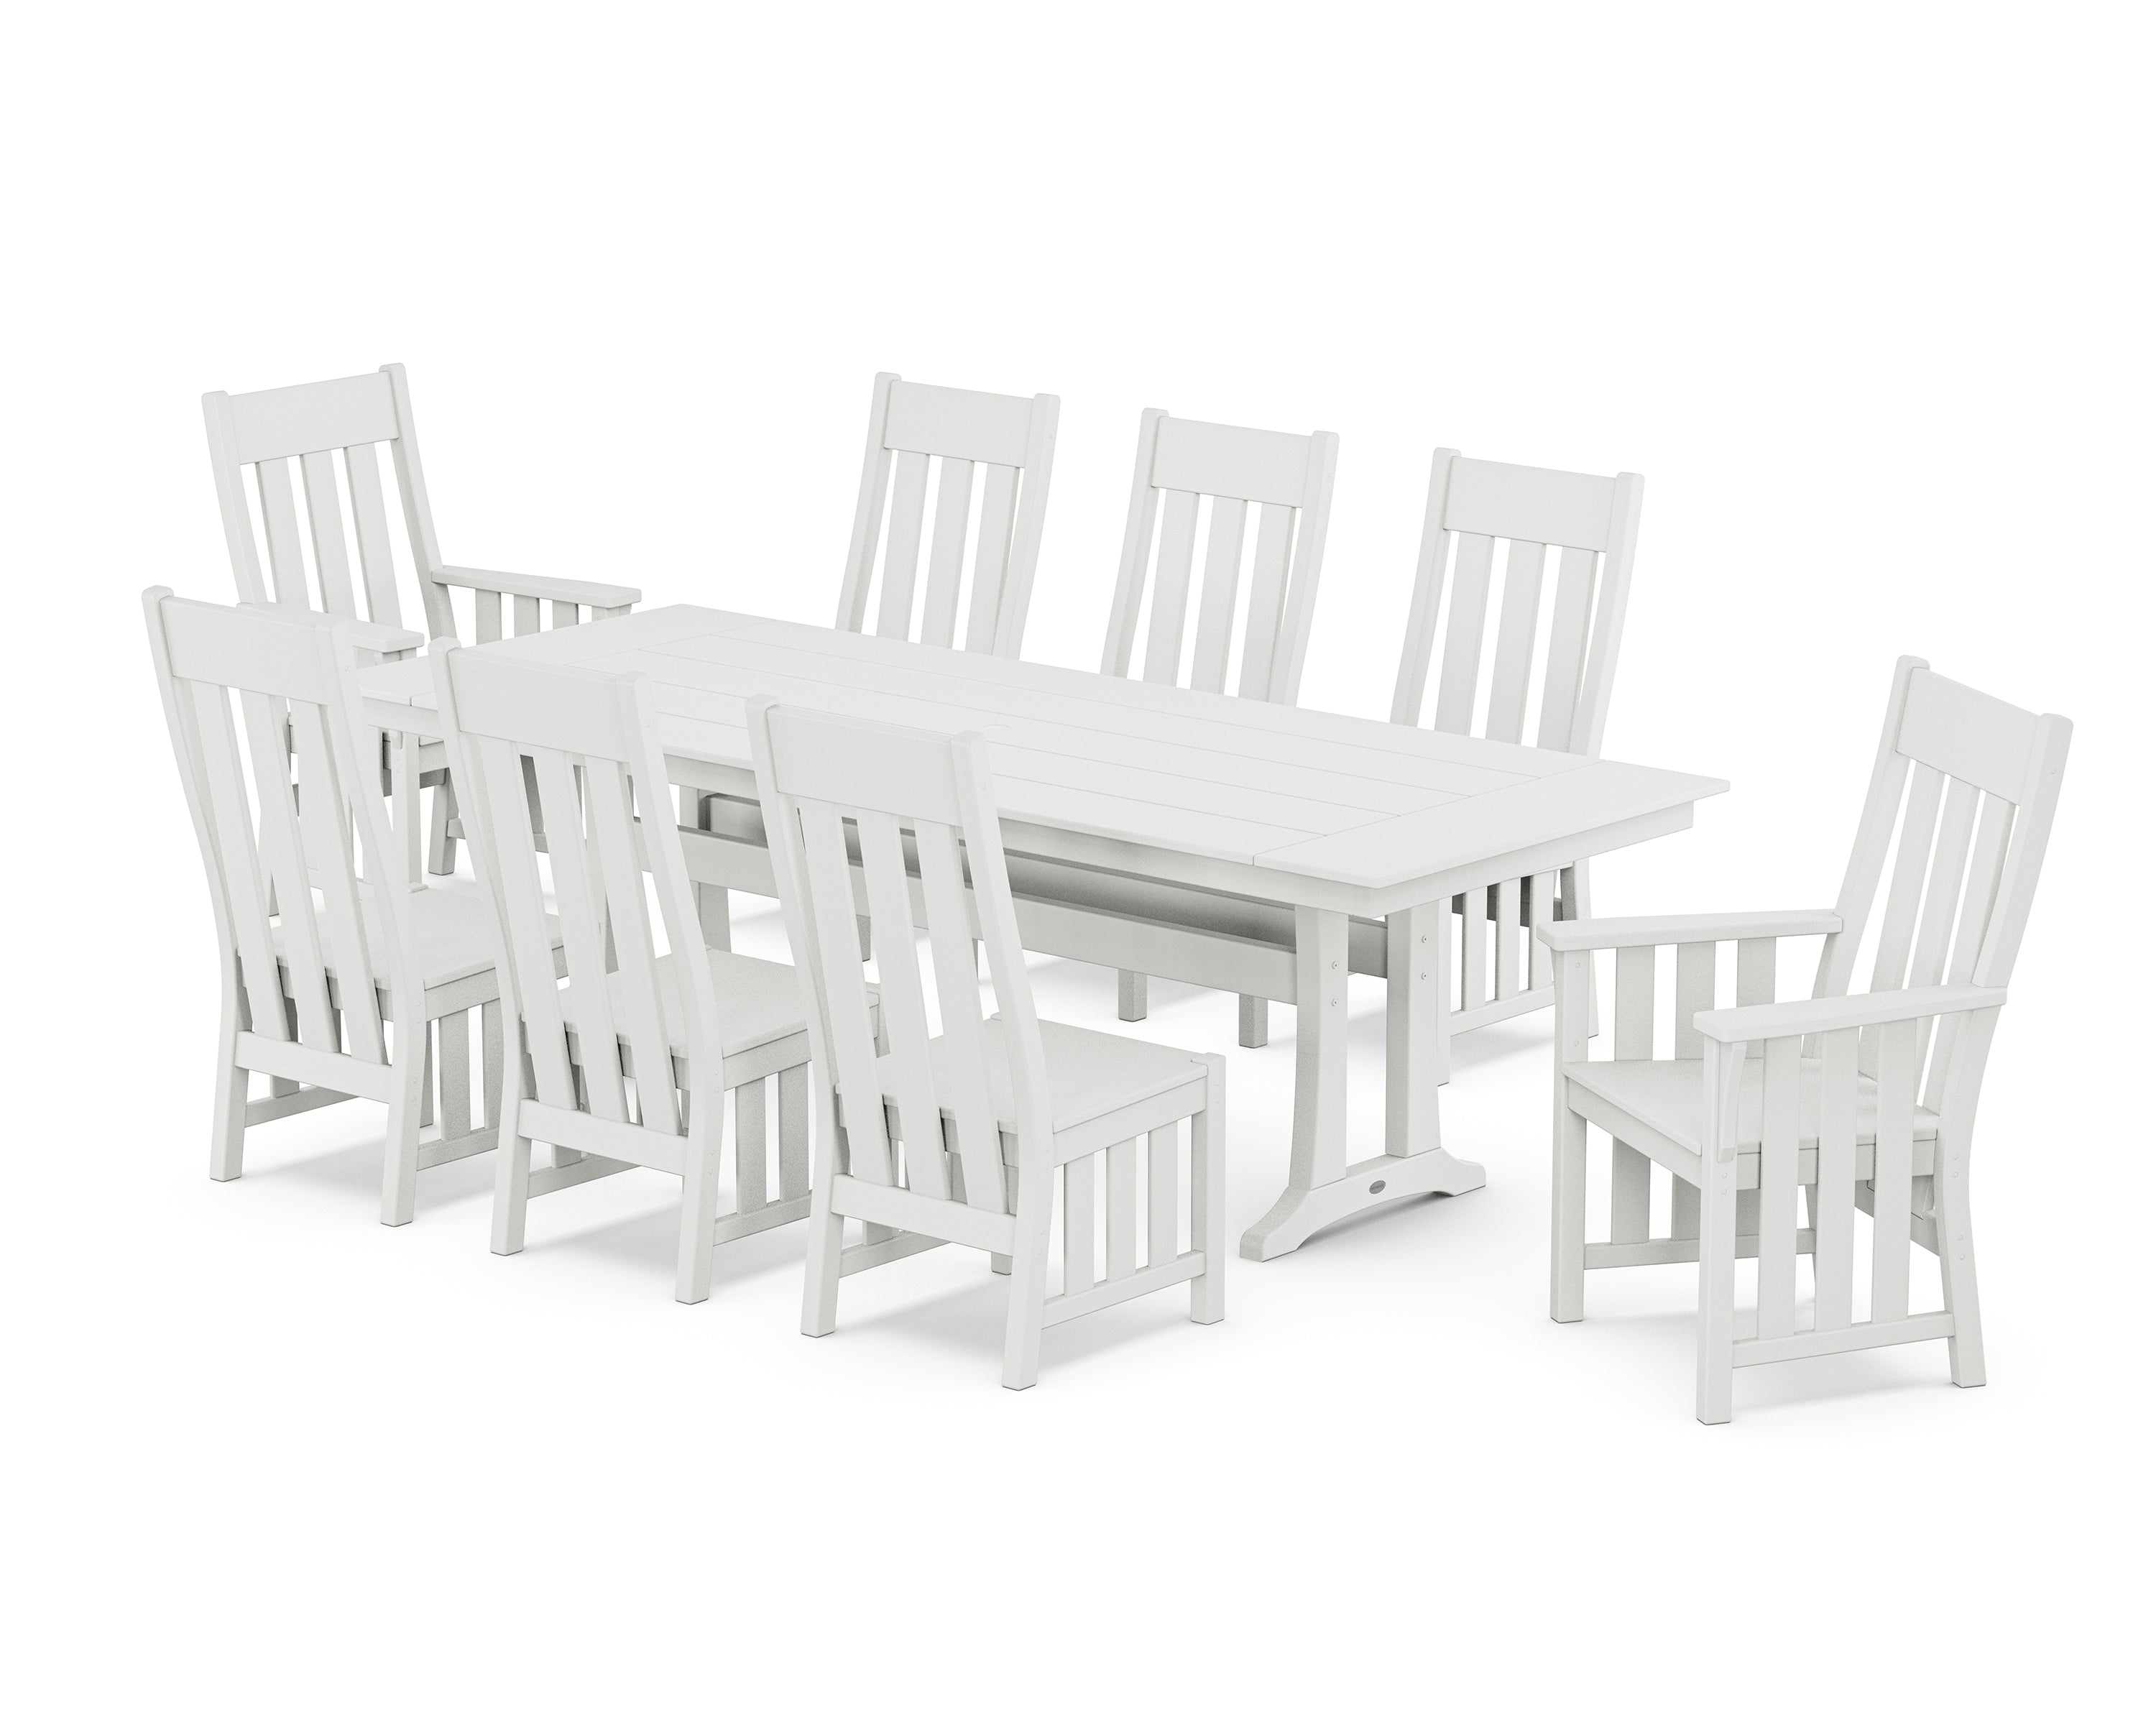 Martha Stewart by POLYWOOD® Acadia 9-Piece Farmhouse Dining Set with Trestle Legs in White